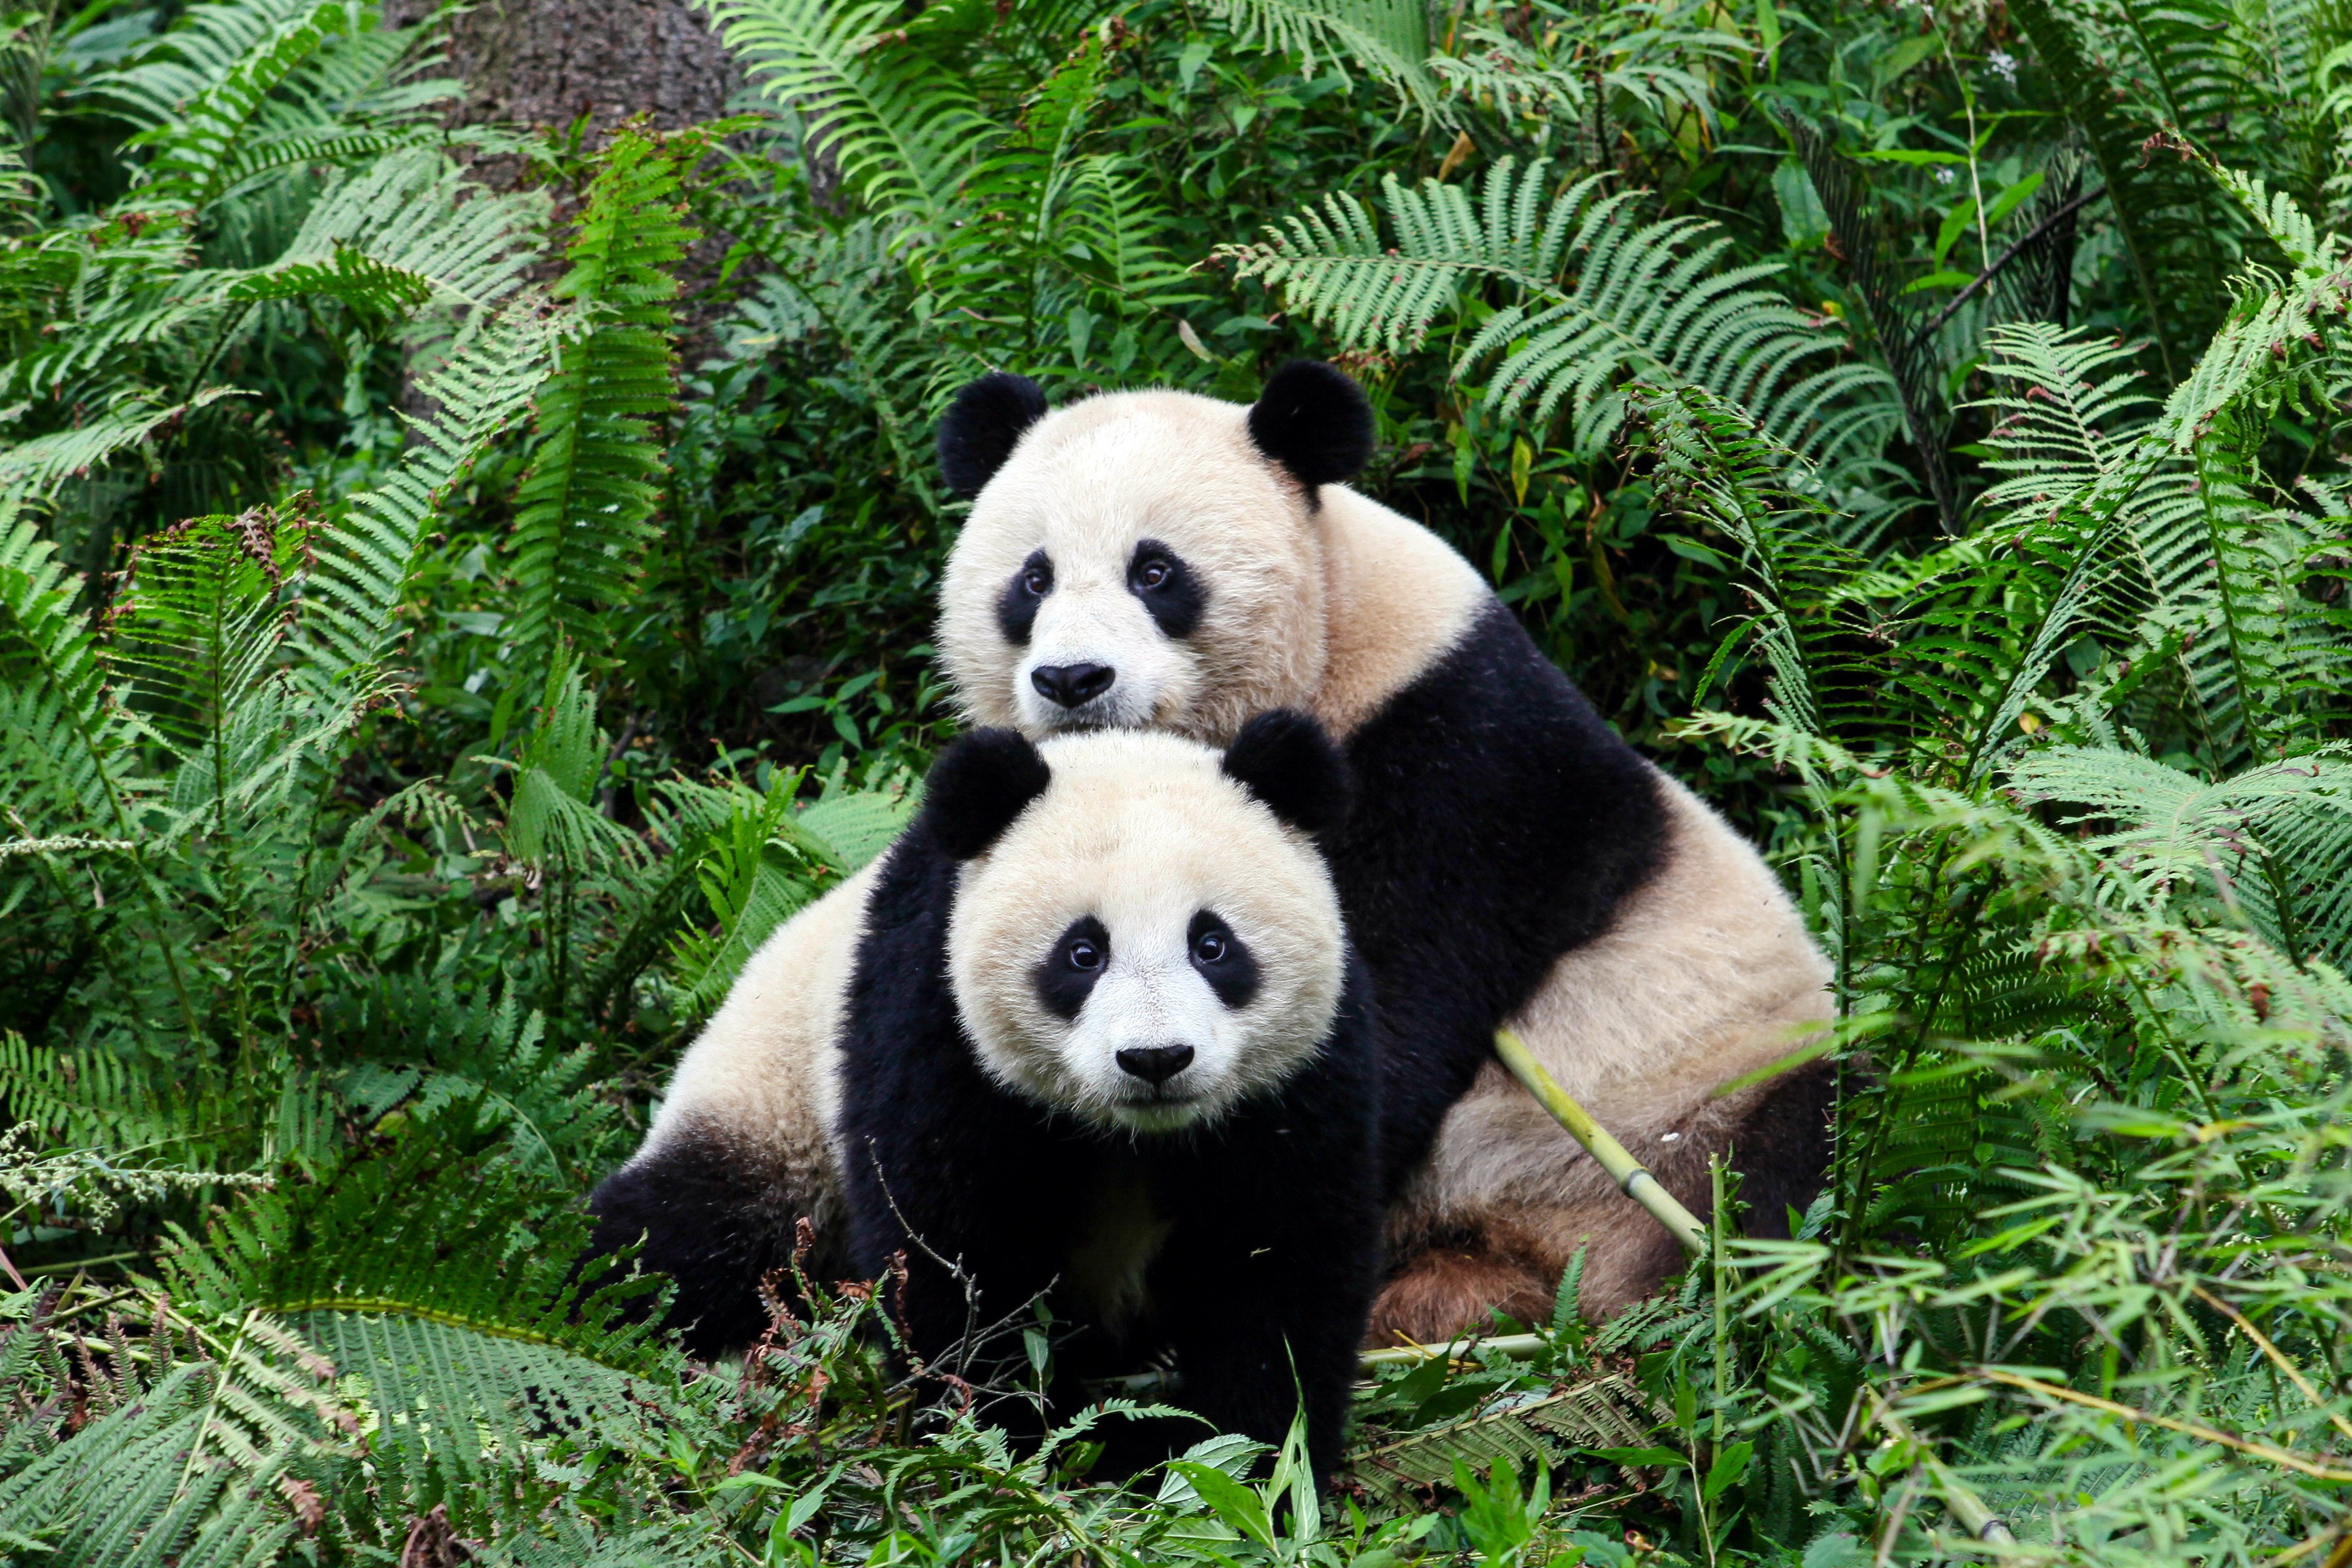 The total number of wild giant pandas in China has increased from about 1,100 in the 1980s to nearly 1,900 today. Photo: Handout via Xinhua